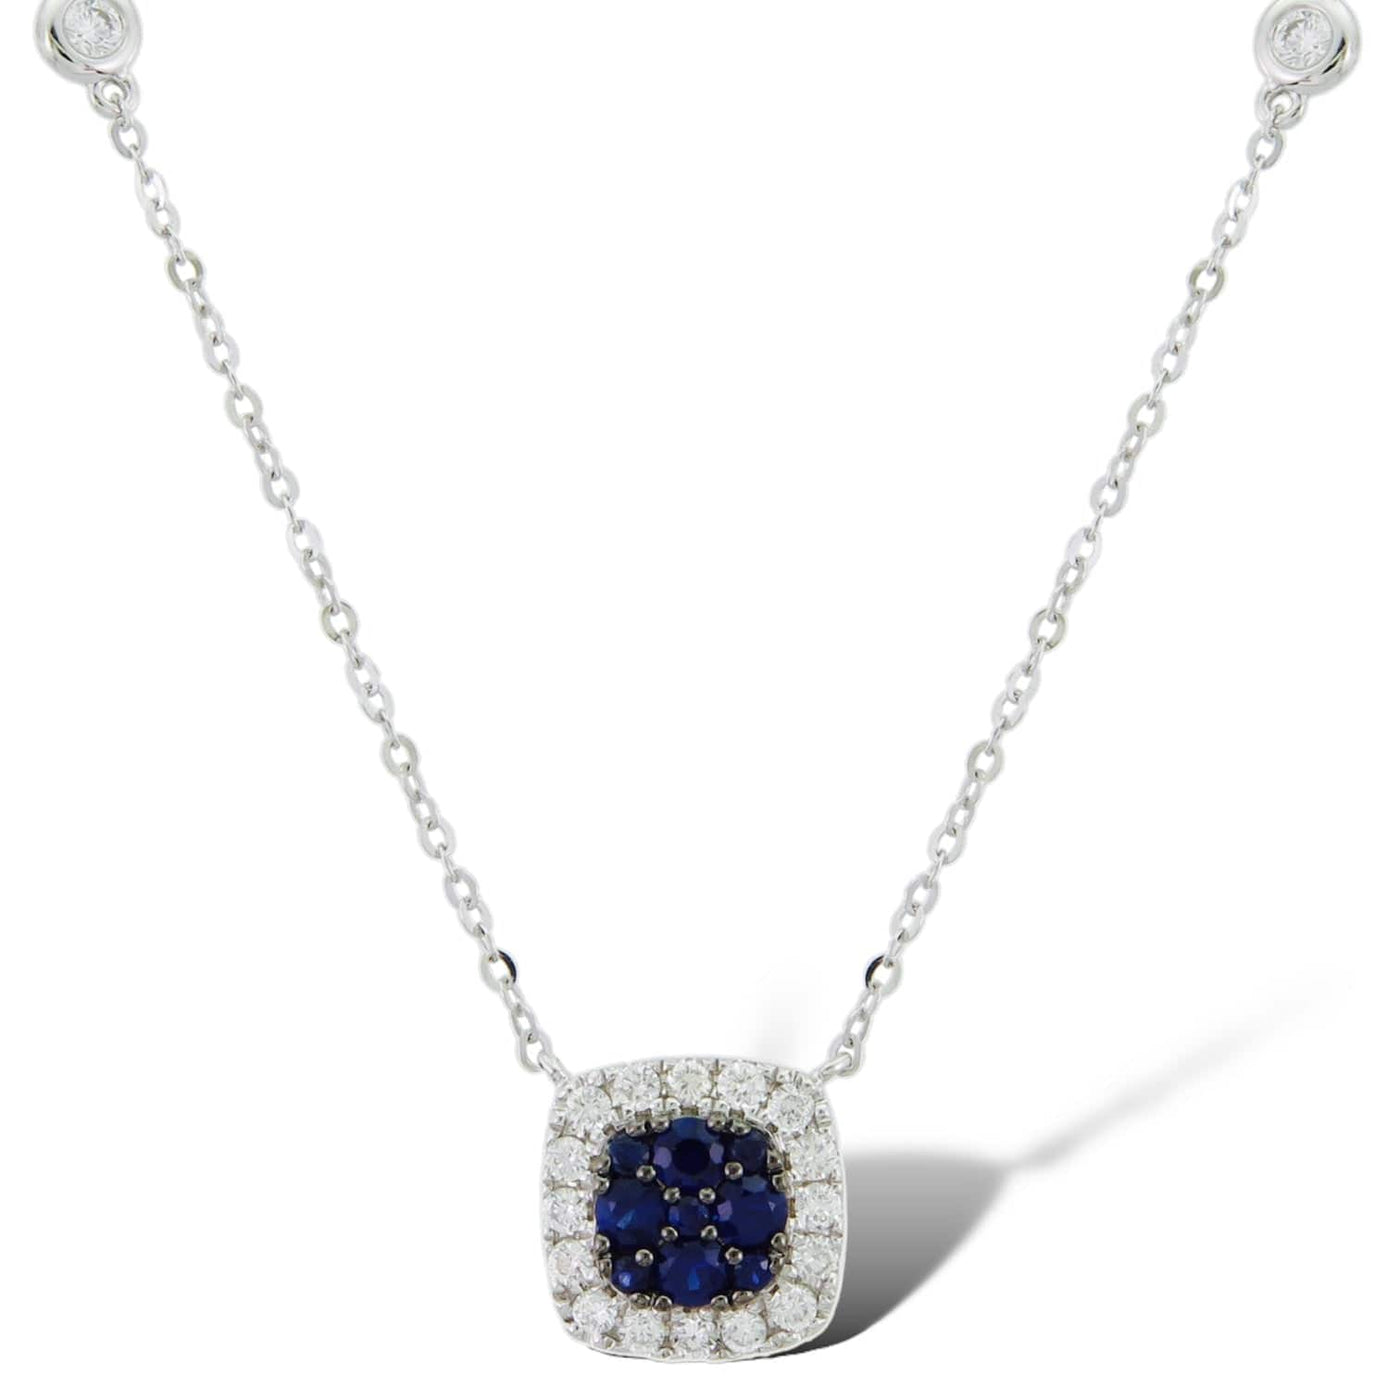 CUSHION SHAPED PENDANT WITH SAPPHIRES AND DIAMONDS